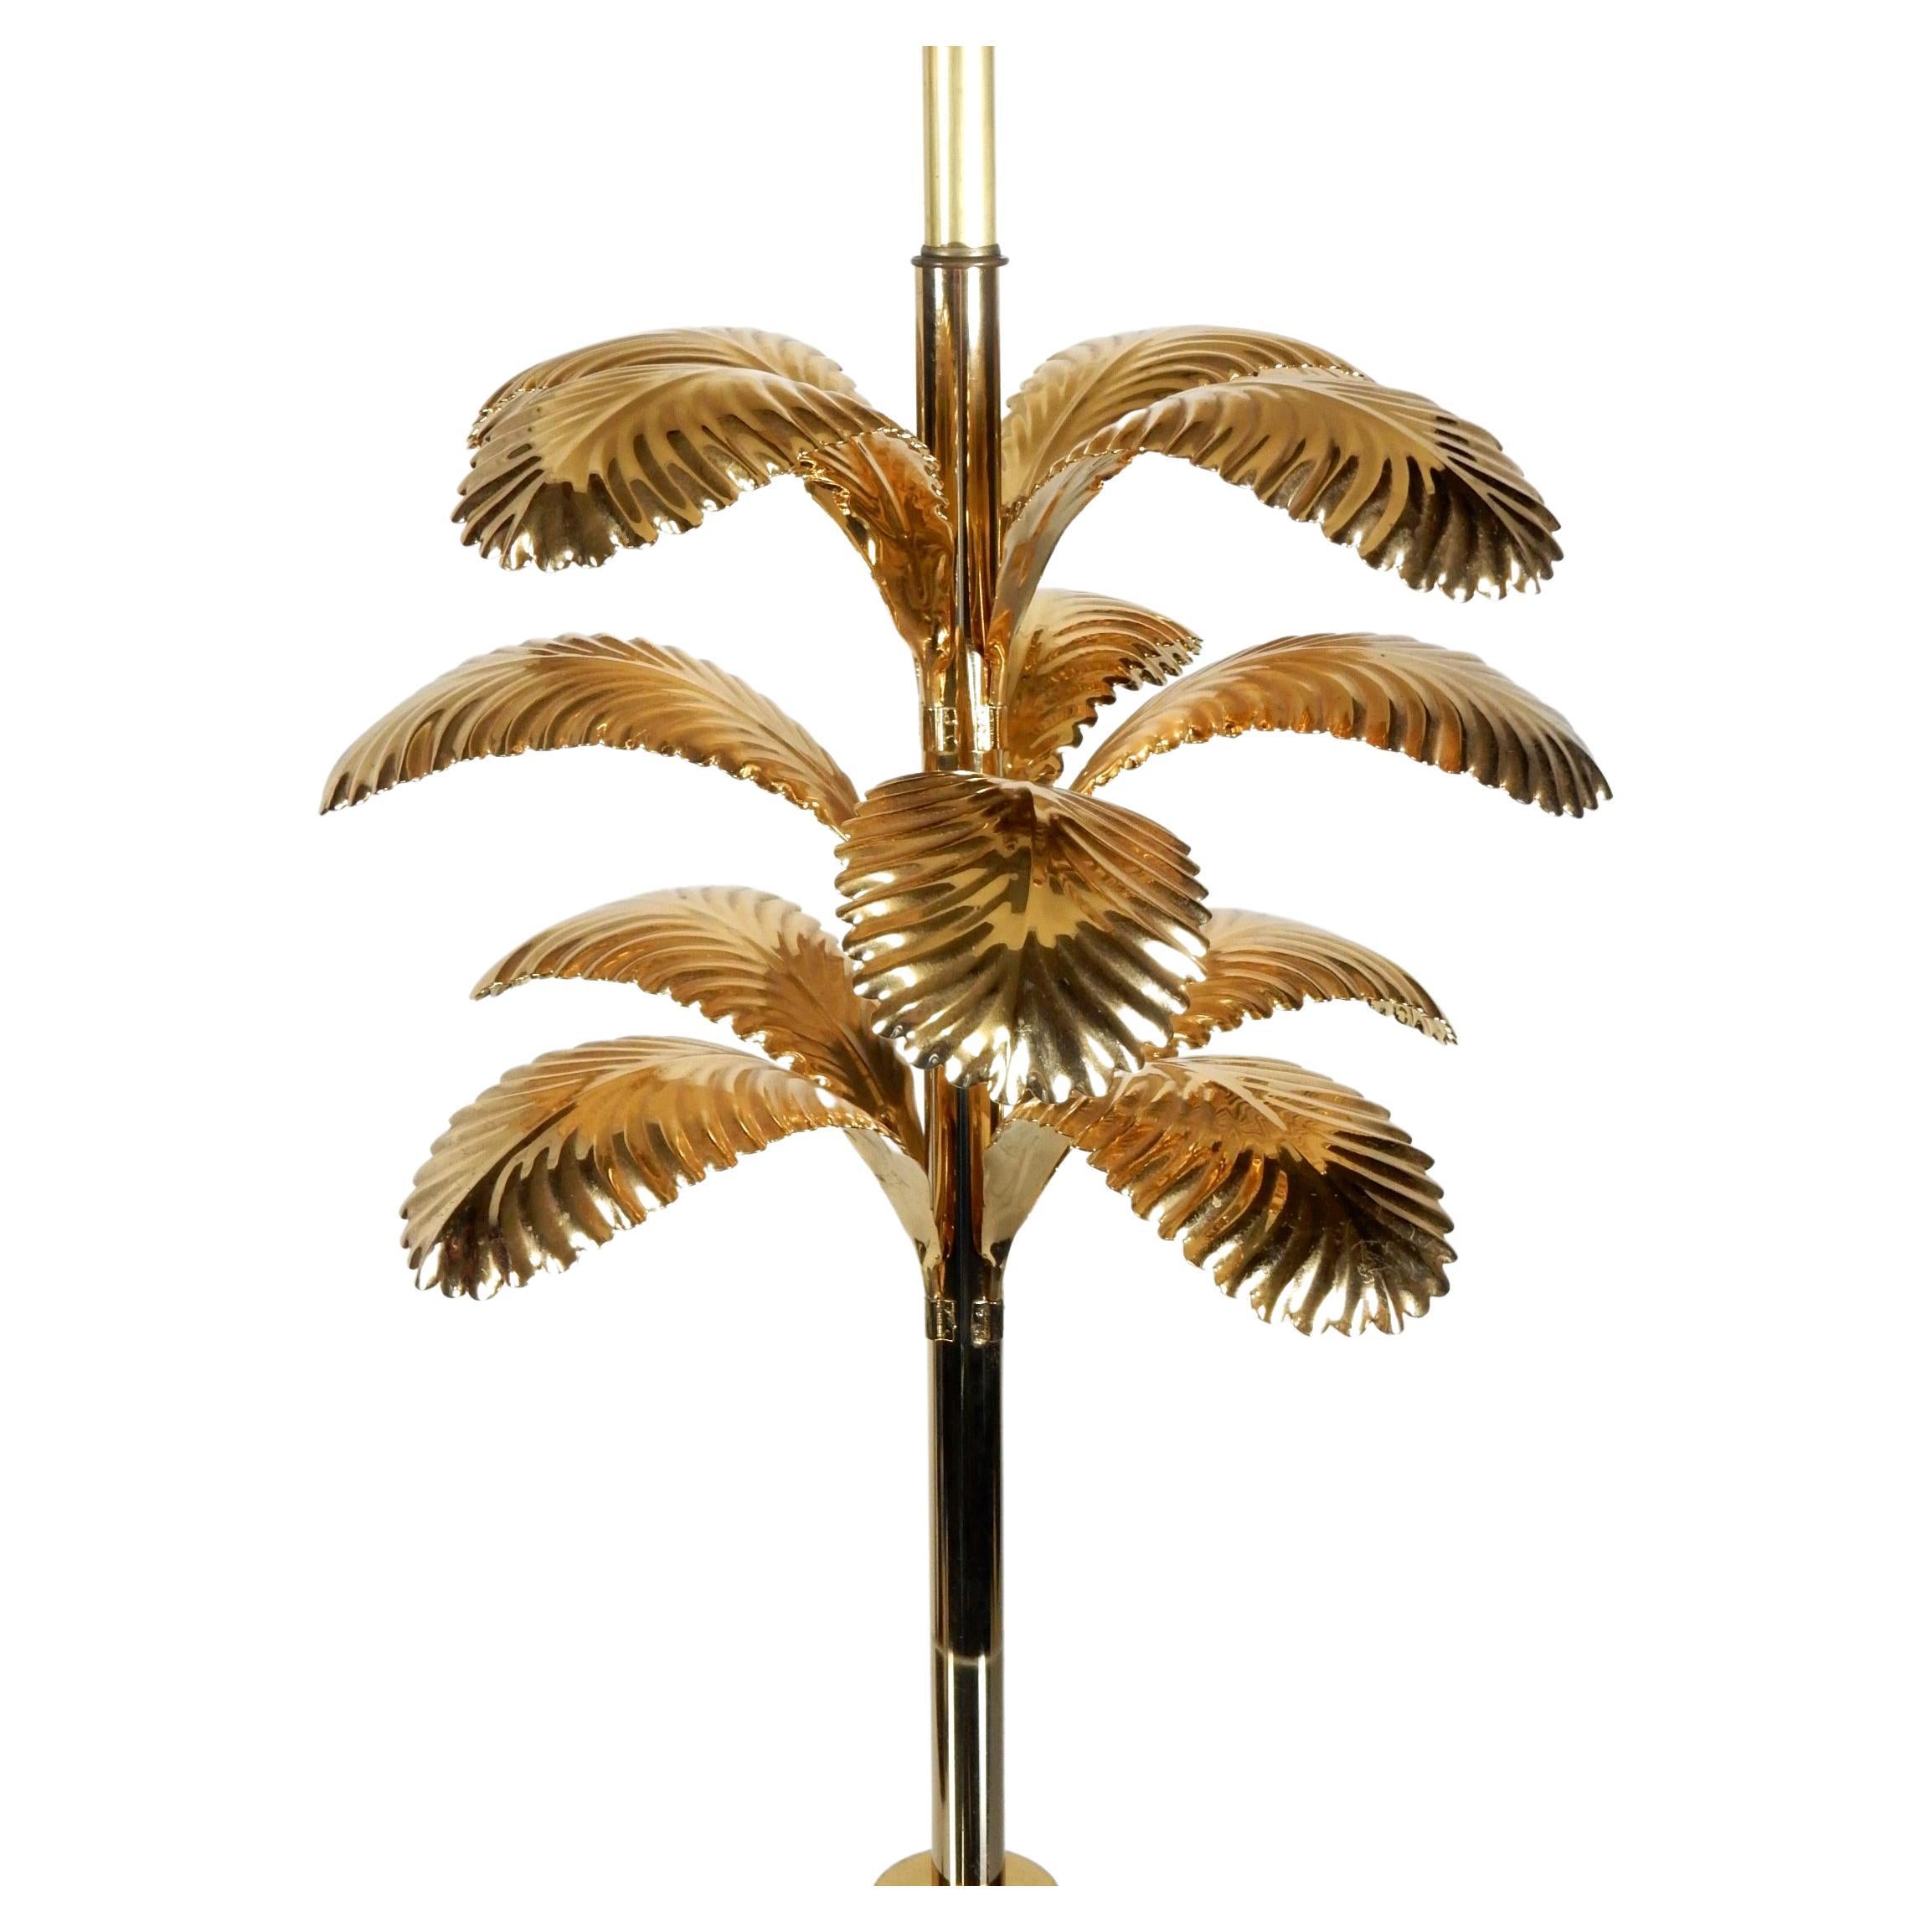 Spectacular brass palm leaf floor lamp/table.
20in Round glass table top stands 26in off floor. 
Weighted tulip brass base keeps it stable.
The brass palm leafs upper section make this a unique
piece of functional art.
2 Standard size light